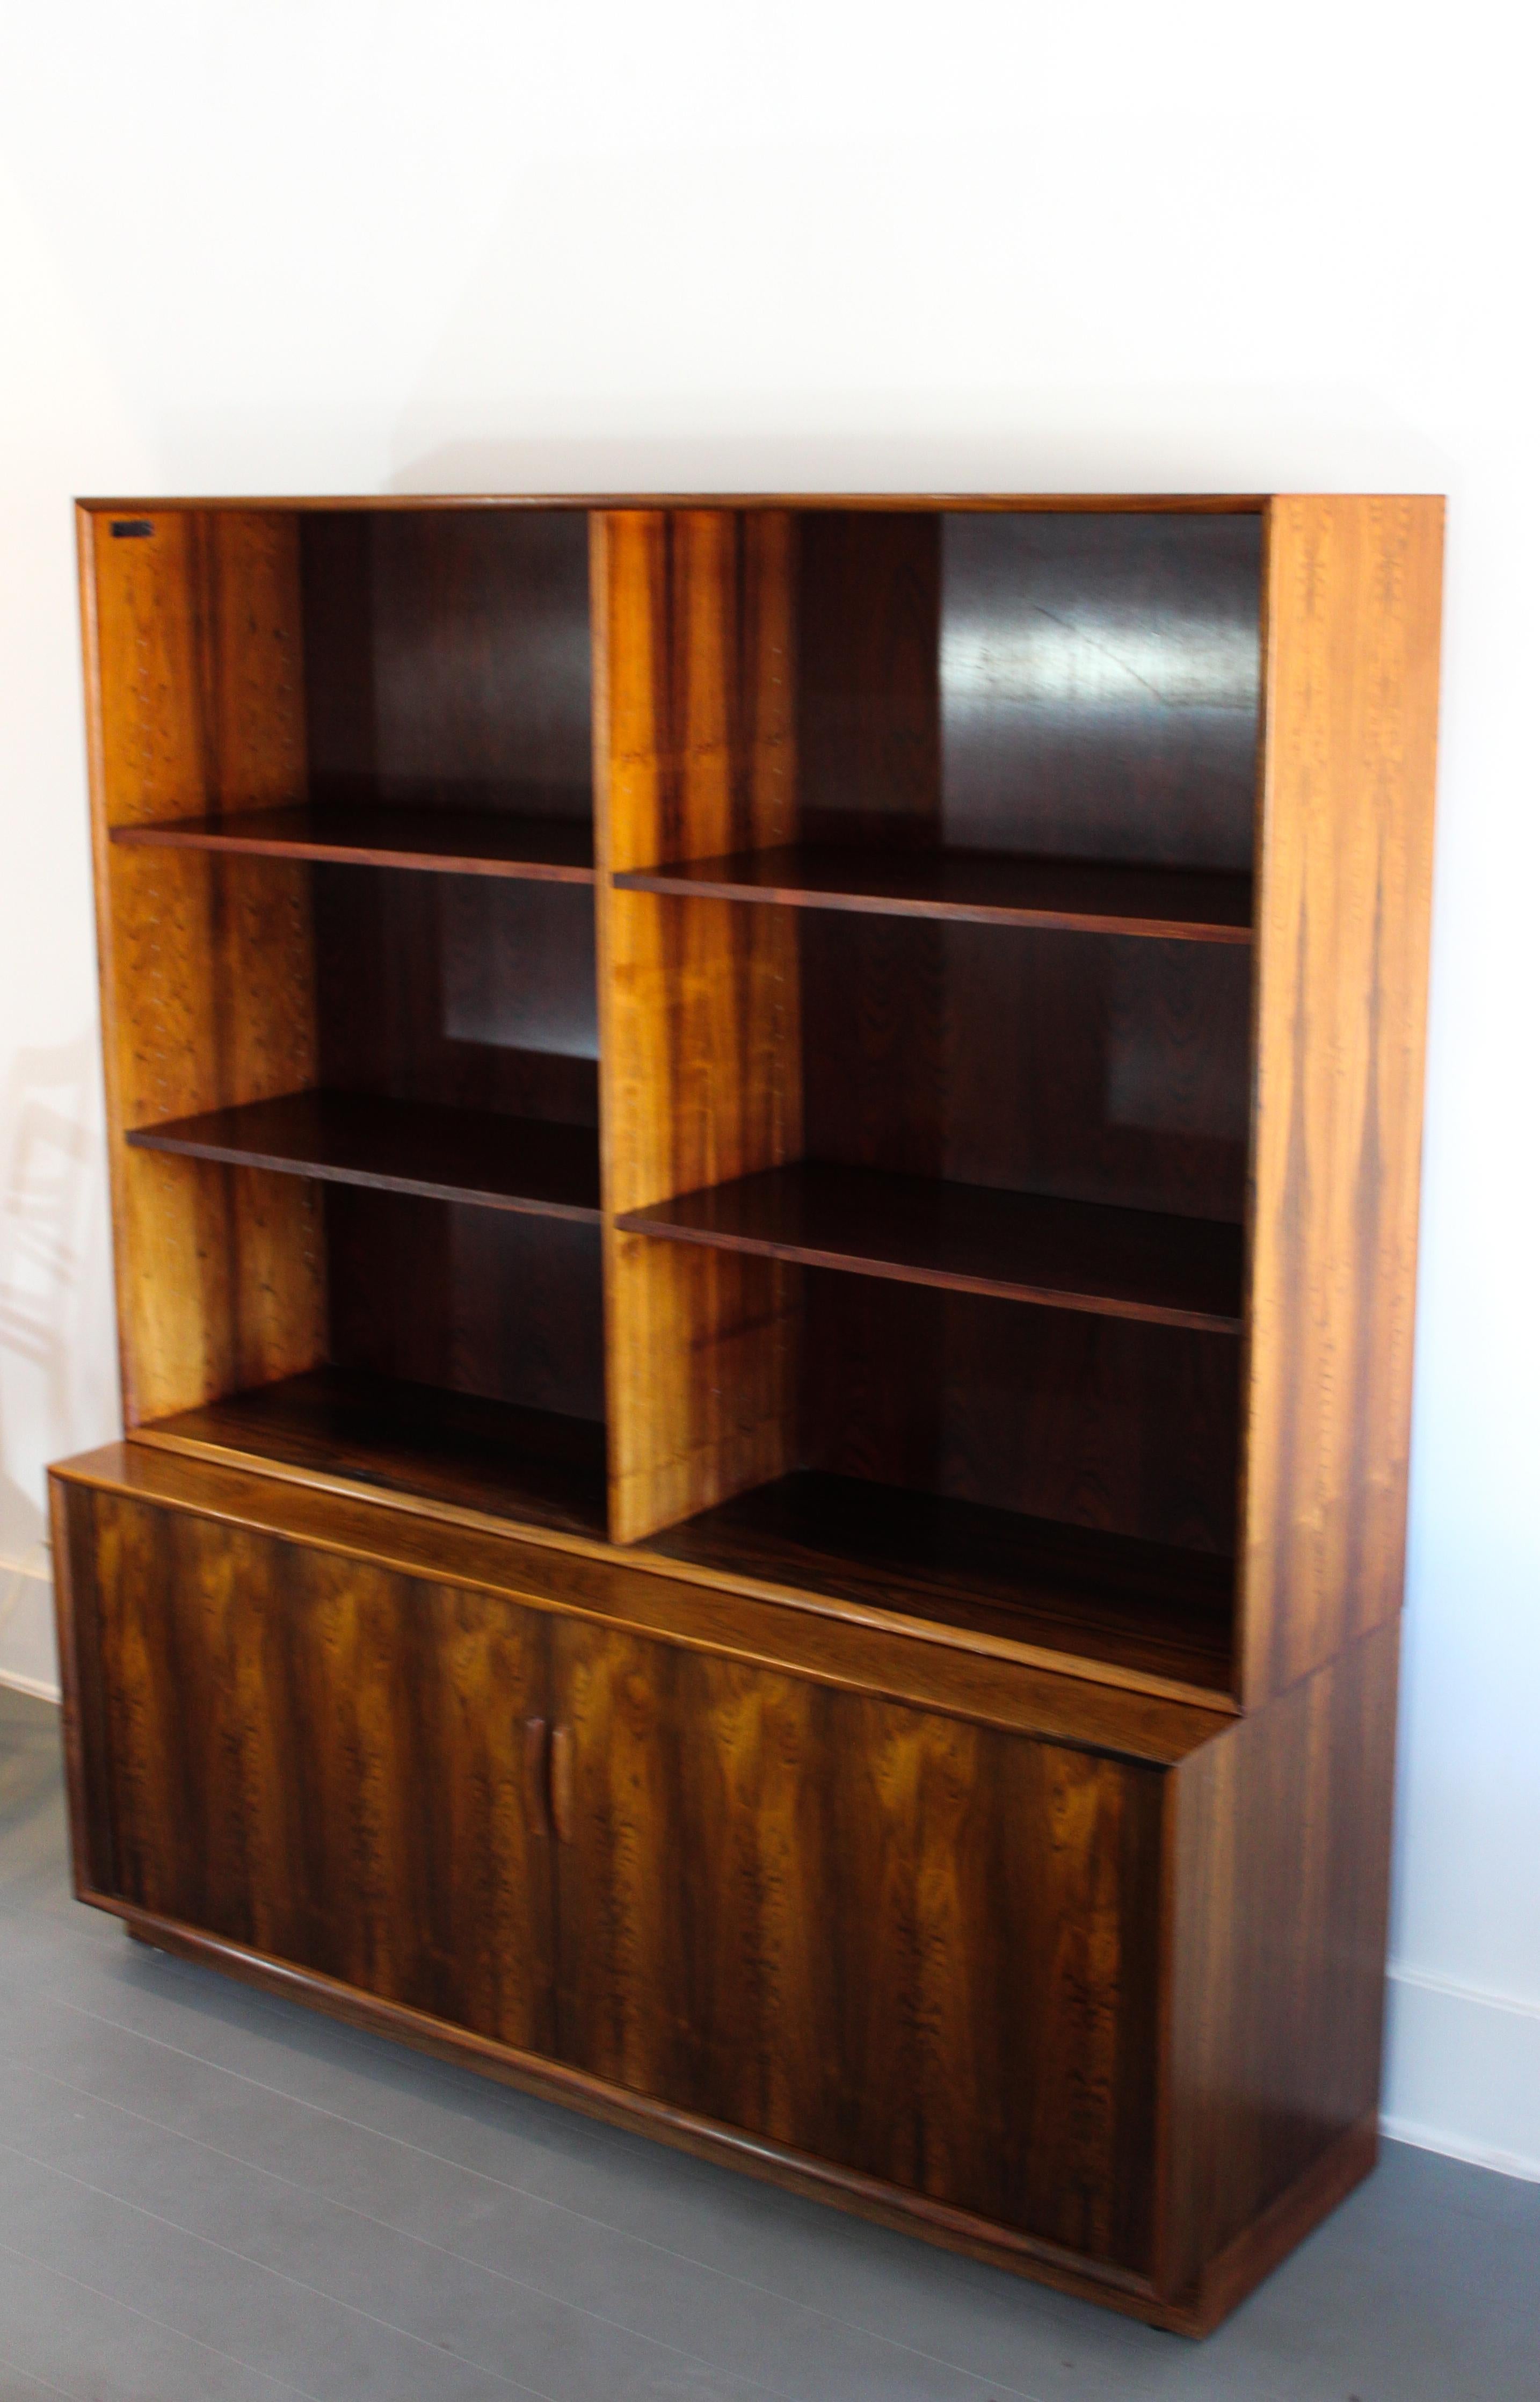 Mid-20th Century Midcentury Rosewood Arne Vodder Book Case with Tambour Doors by Sibast, 1950s For Sale